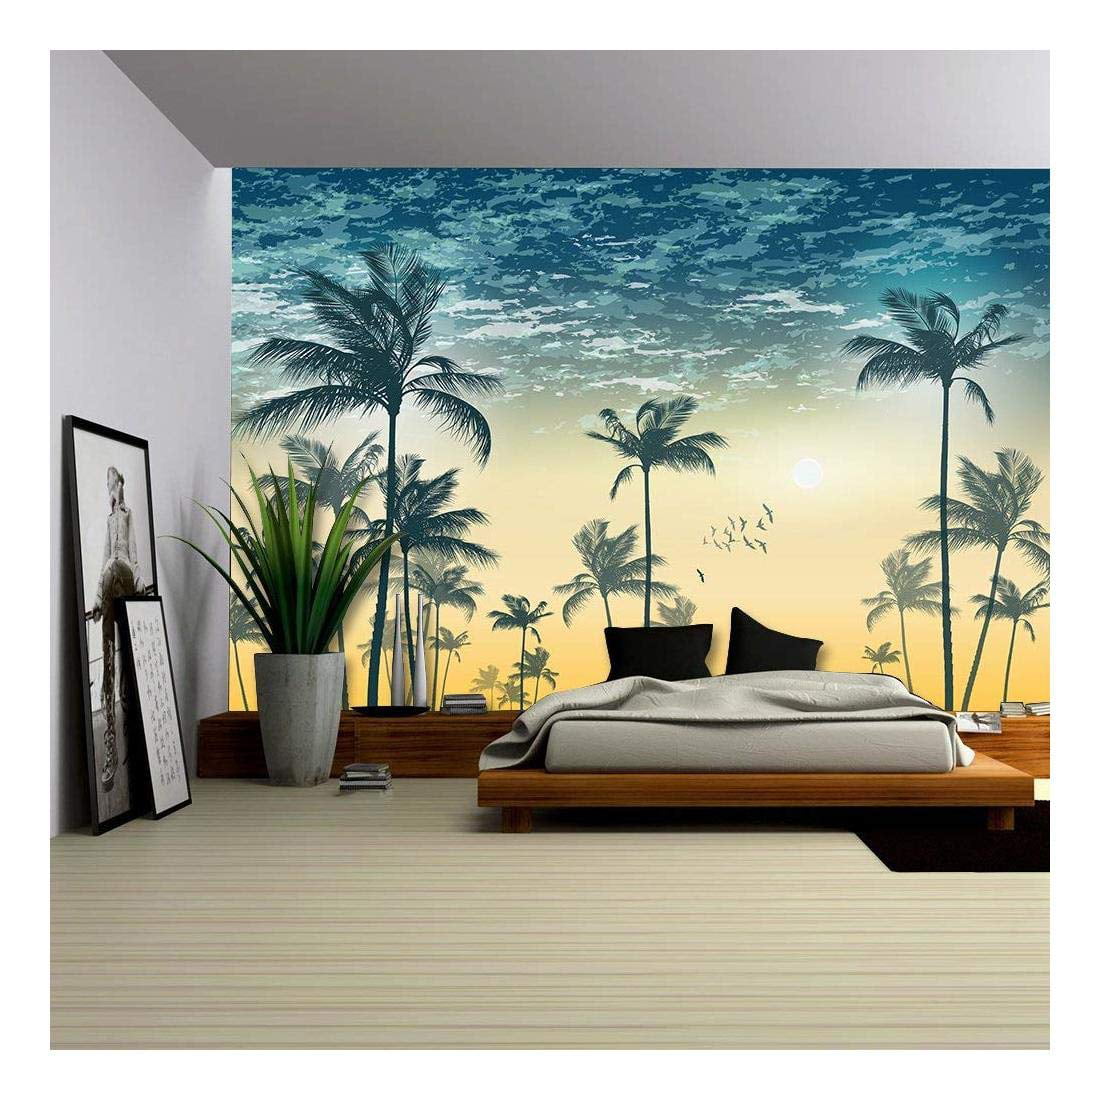 Repositionable removable wallpaper Self adhesive Black and white sunset palm tree island wallpaper Peel & Stick